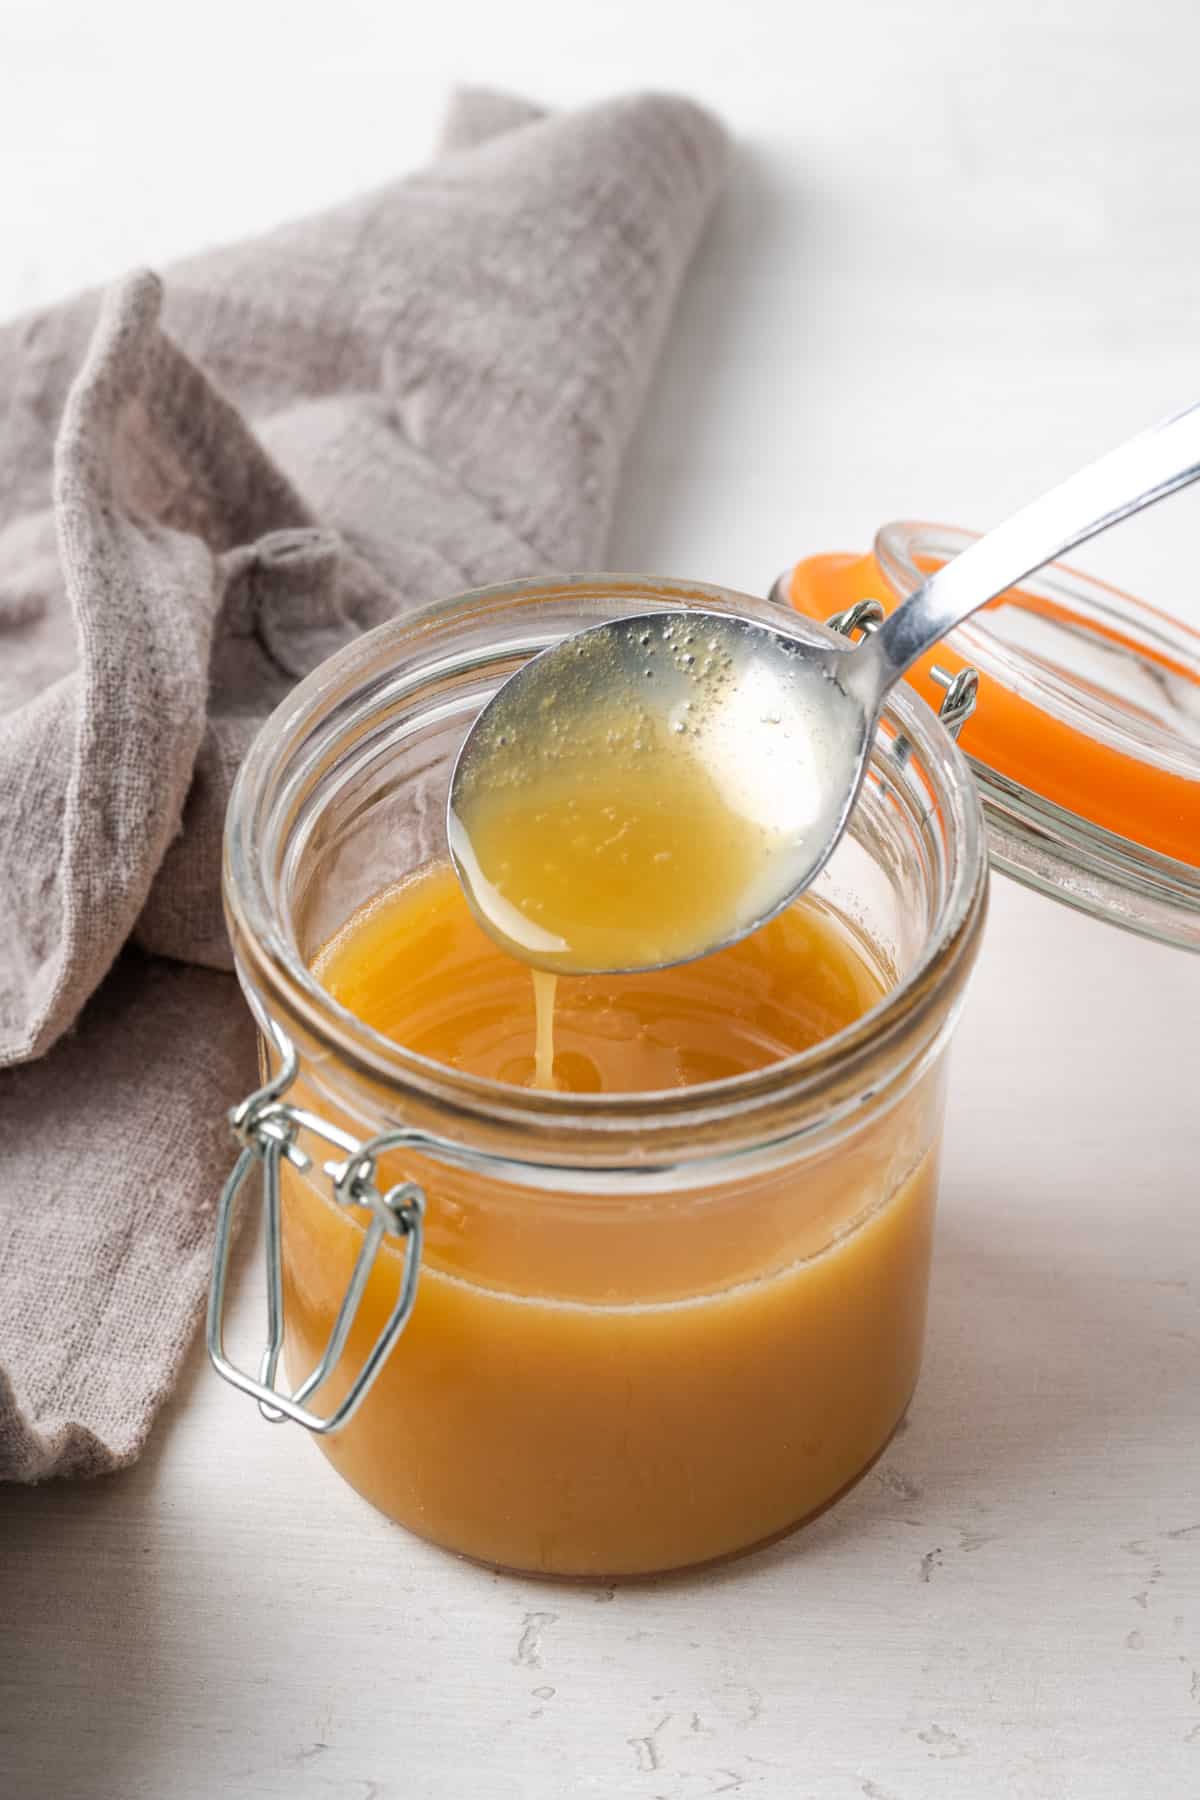 Dairy free sweetened condensed milk dripping from a spoon into a glass jar.